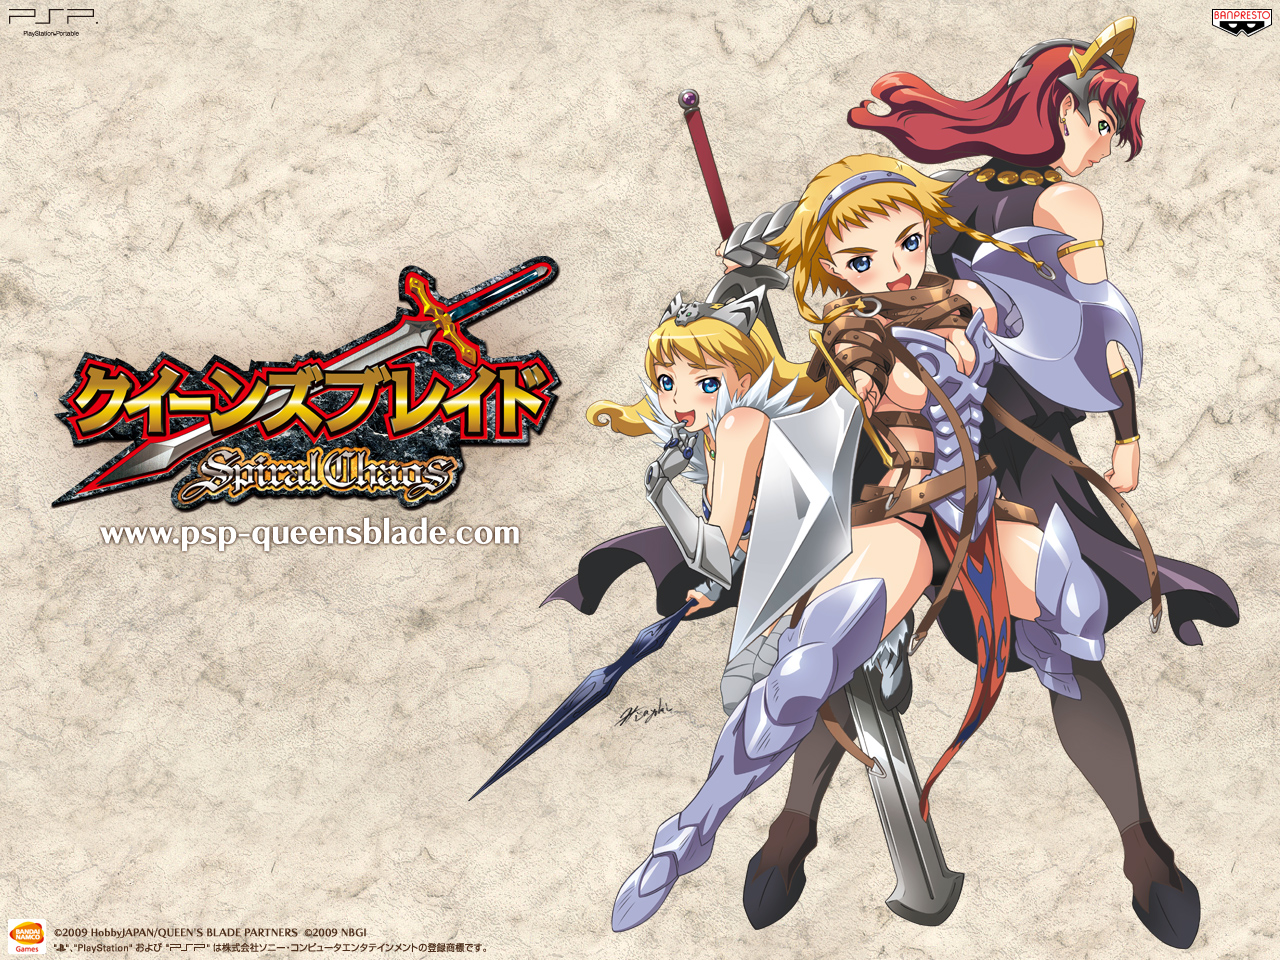 Queens Blade Spiral Chaos Fiche RPG reviews previews wallpapers